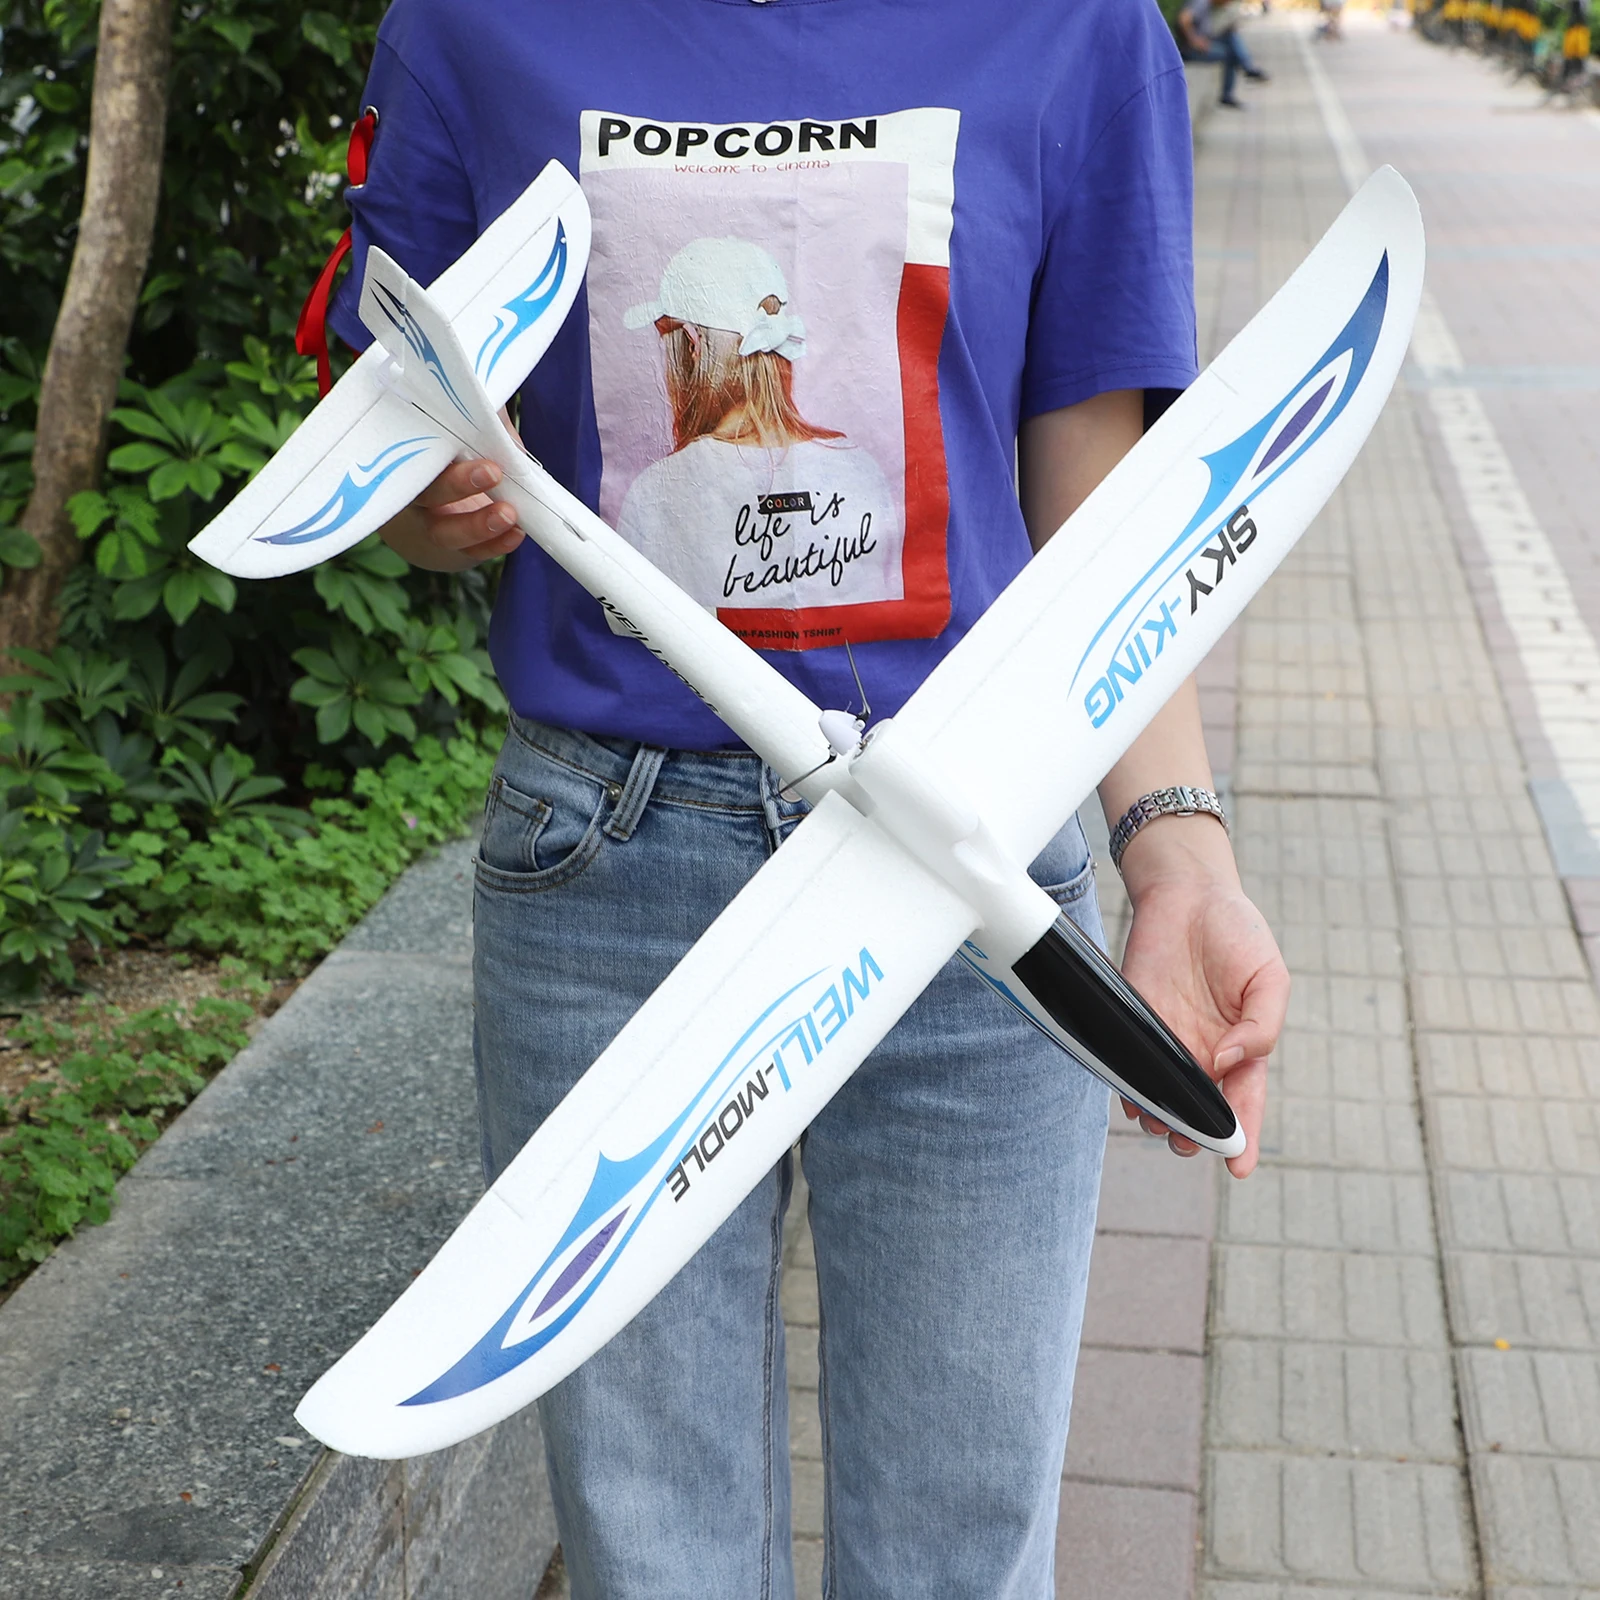 WLtoys Fixed Wing Rc Planes Remote Control Airplanes F959 Wingspan Glider Toy Planes